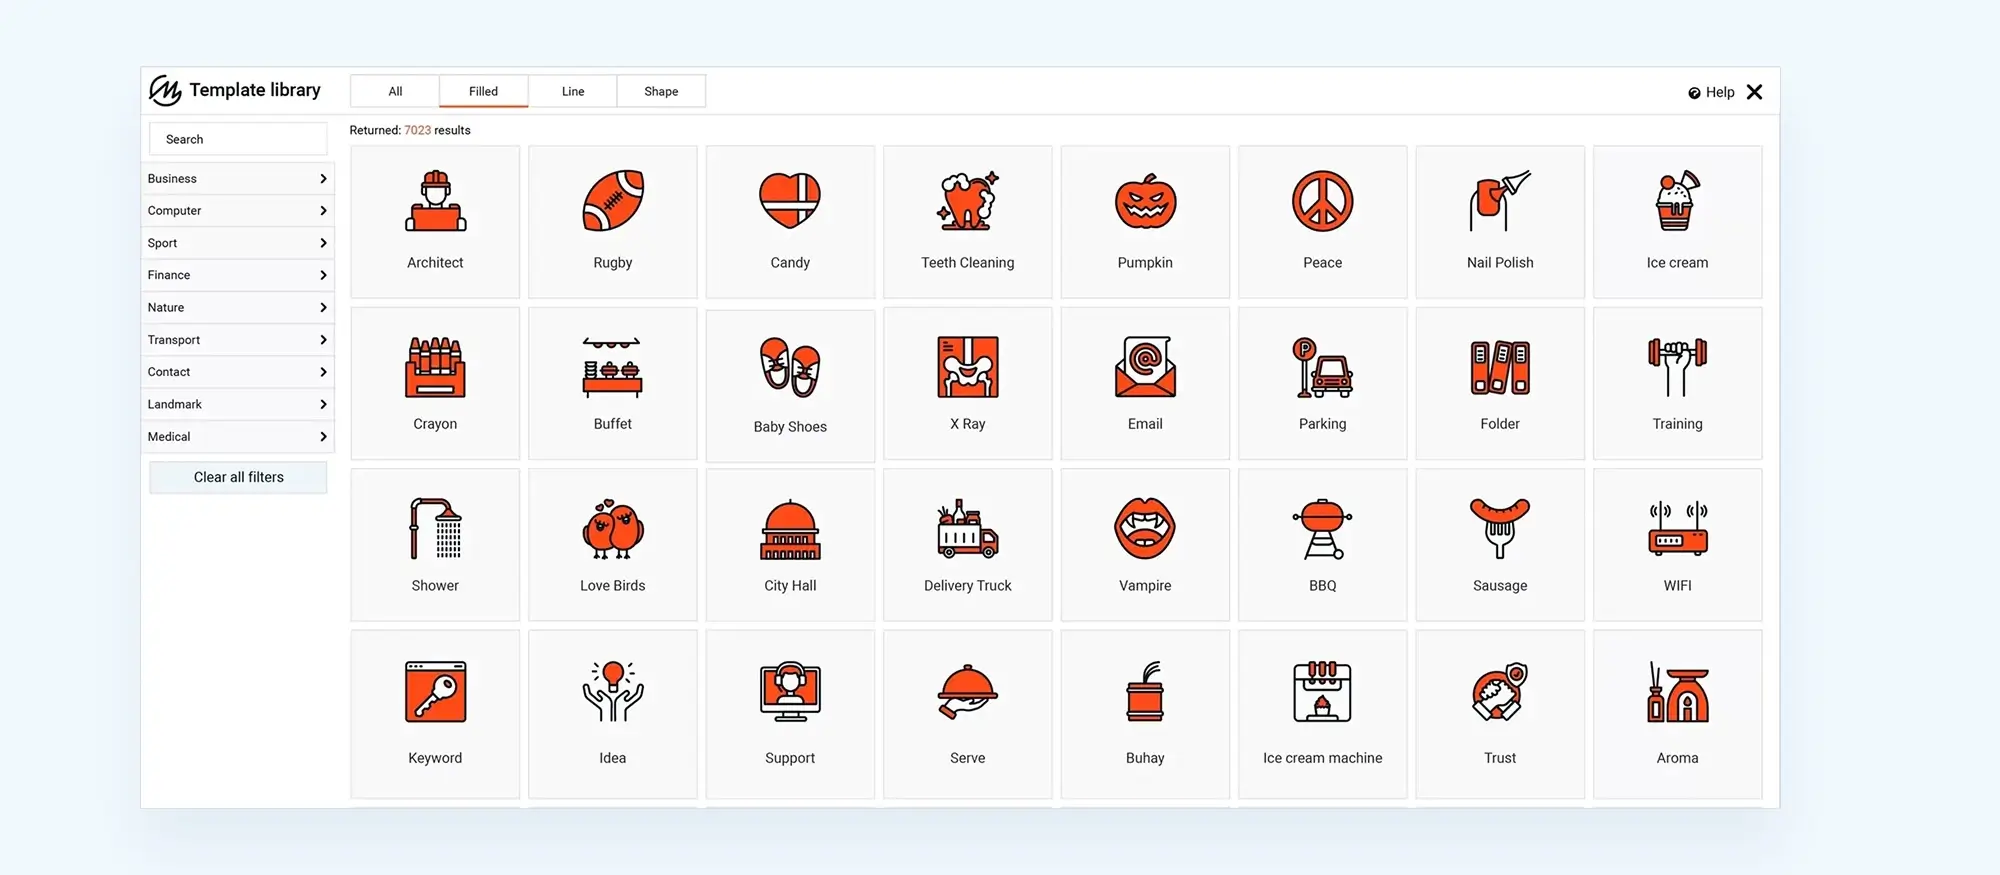 Overview of the 13,410 free SVG icons and shapes